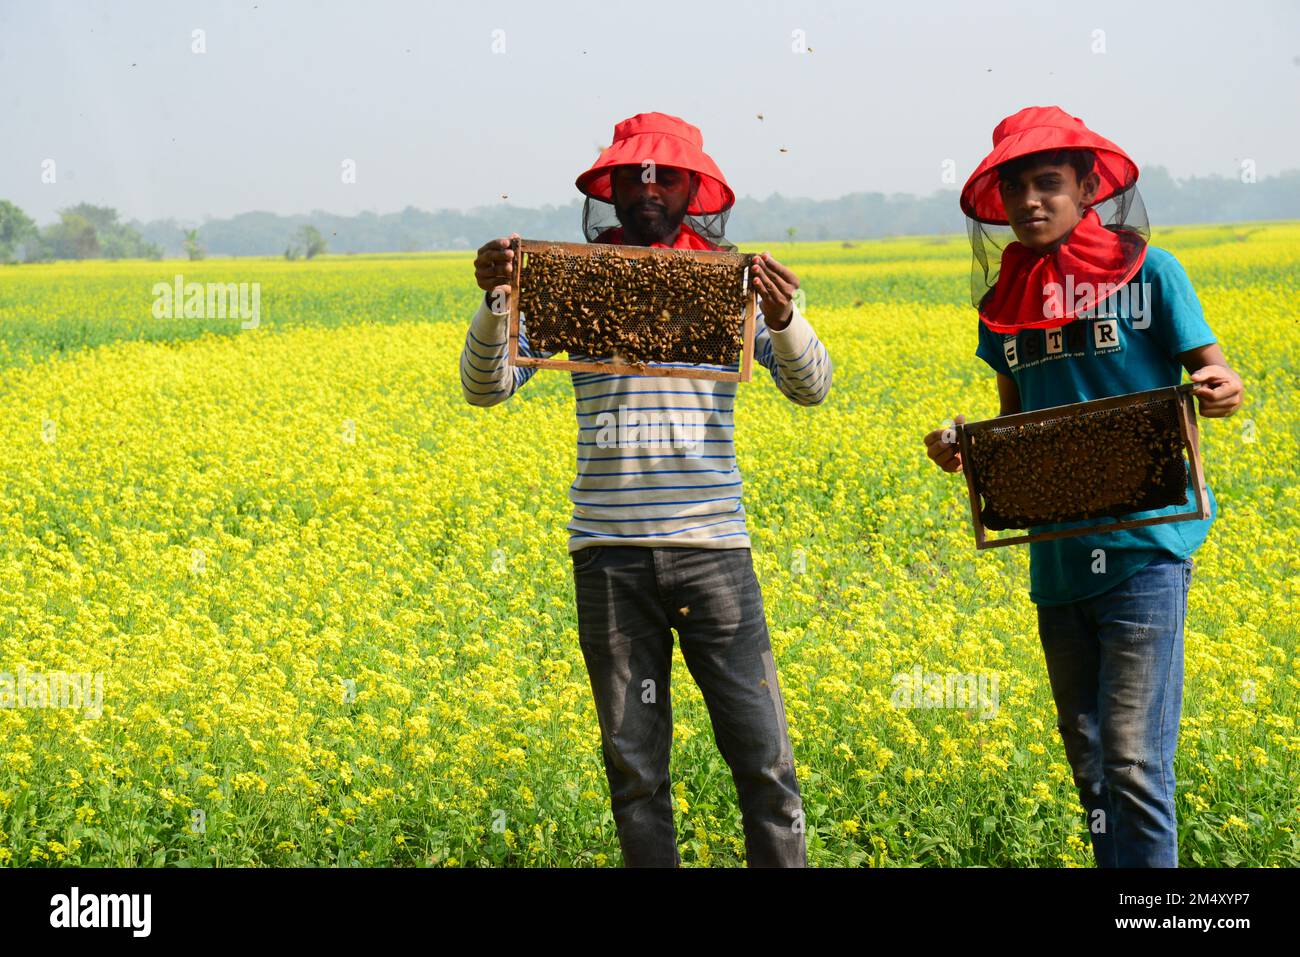 Munshigonj, Bangladesh. 23rd Dec, 2022. Farmers are seen at a honey farm collecting honeycomb from specially prepared honeycomb box around mustard field at Satgaon in Munshigonj, Bangladesh, on December 23, 2022. According to the Bangladesh Institute of Apiculture (BIA), around 25 thousand cultivators including 1,000 commercial agriculturists produce at least 1500 tons of good quality honey a year across the country. Credit: Mamunur Rashid/Alamy Live News Stock Photo